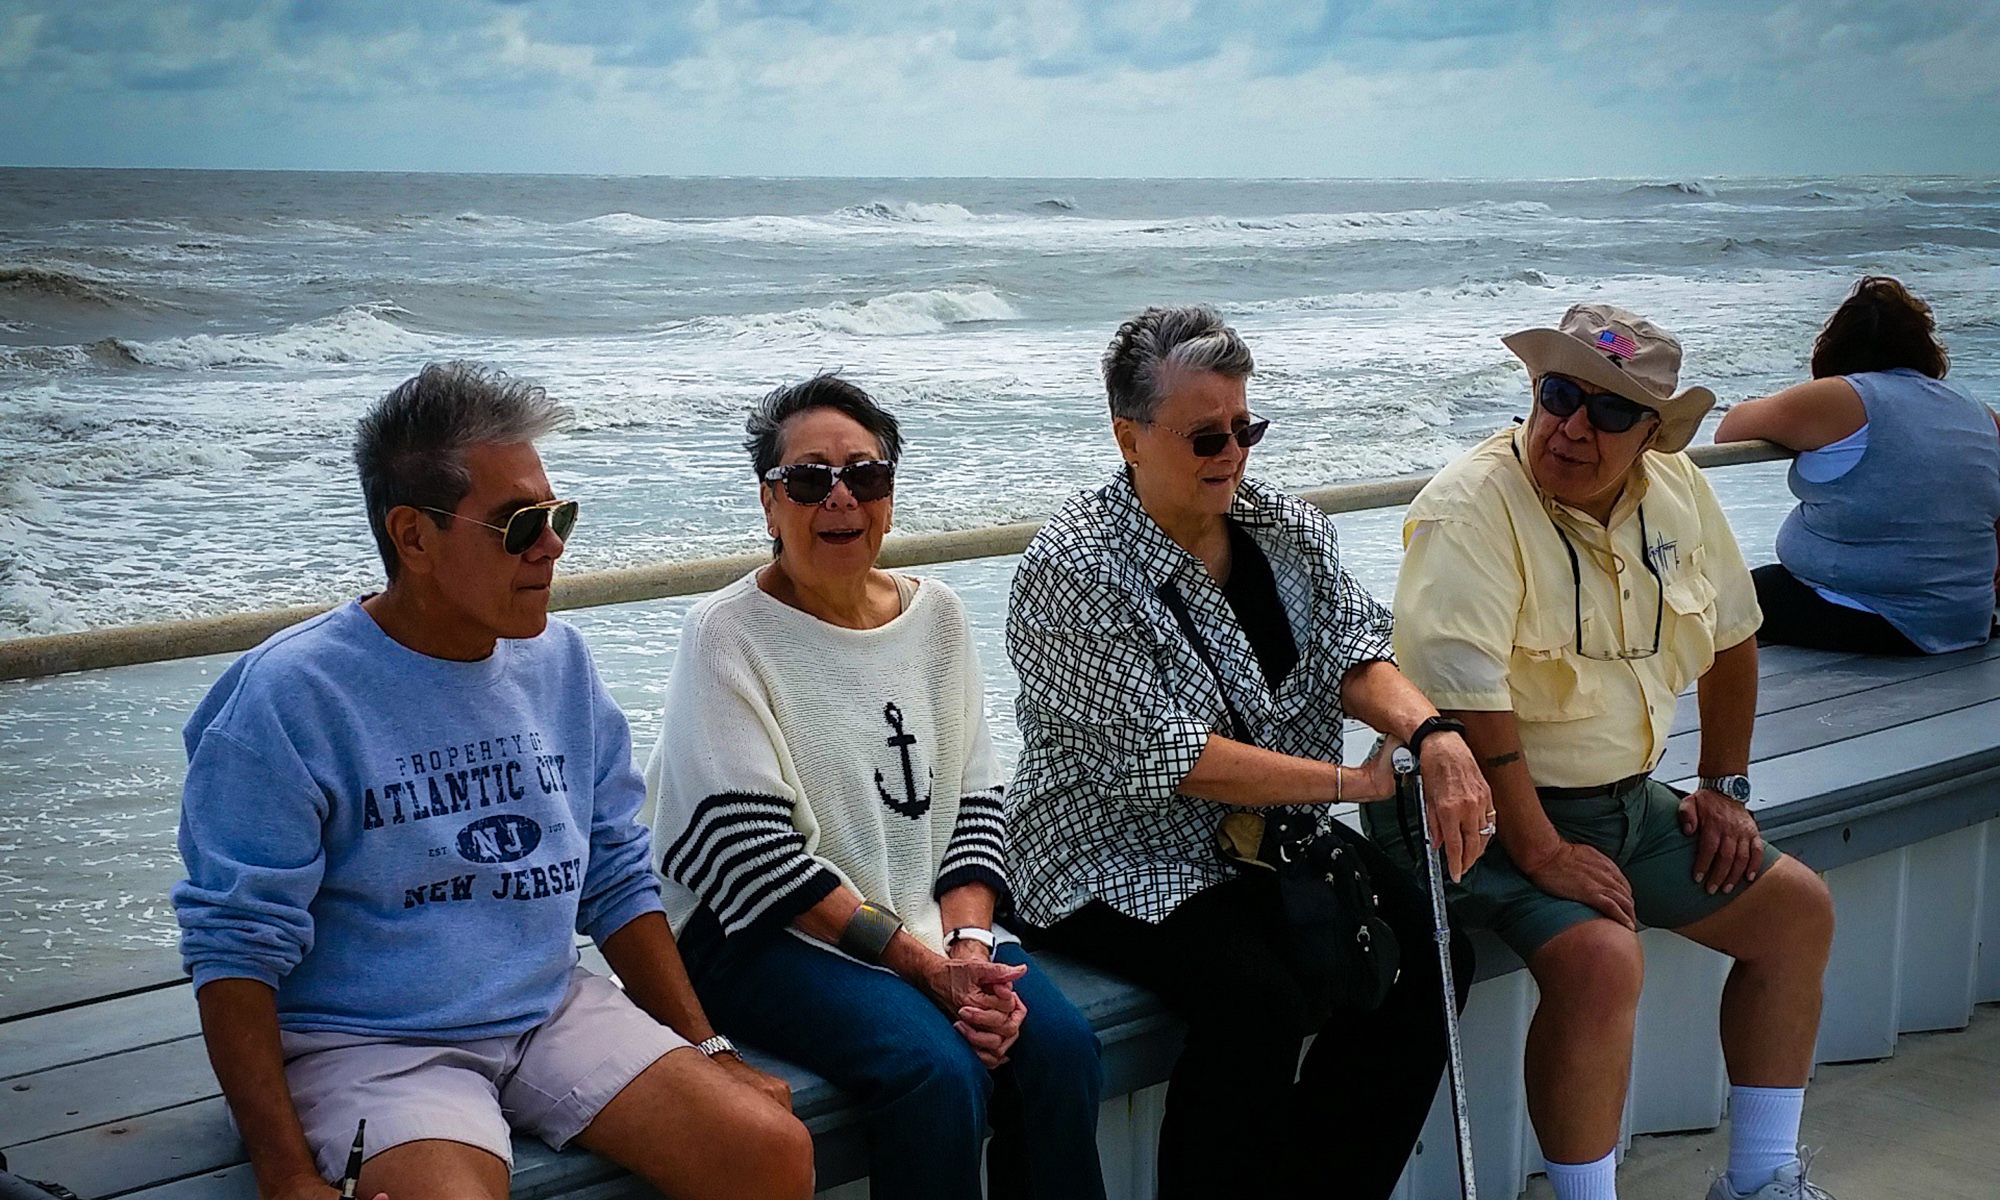 Jim, Sissie, Sherry and Jack - New Jersey Shore